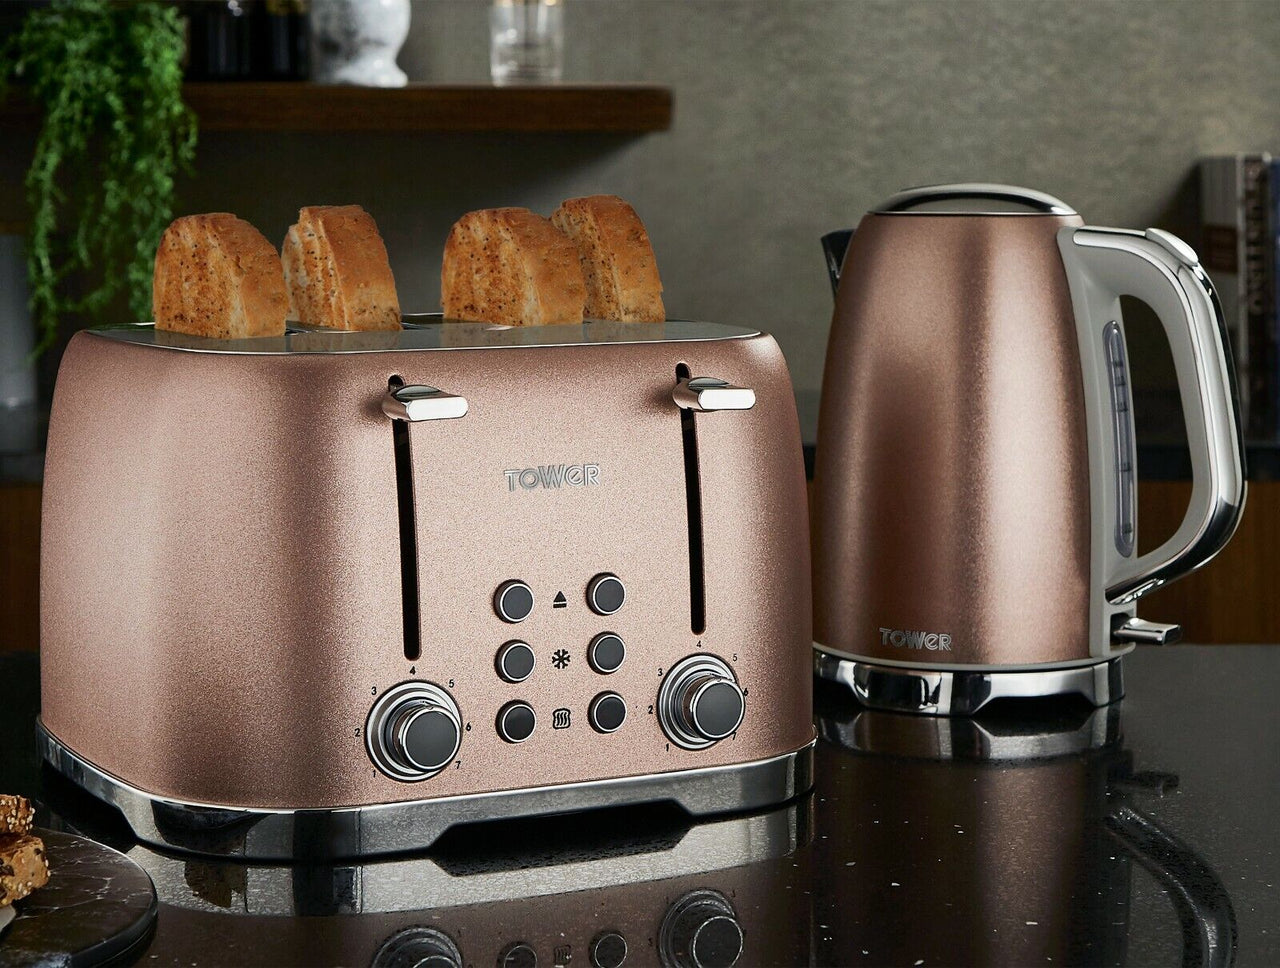 Tower Glitz Blush Pink Jug Kettle, 4 Slice Toaster & 3 Canisters Matching Set